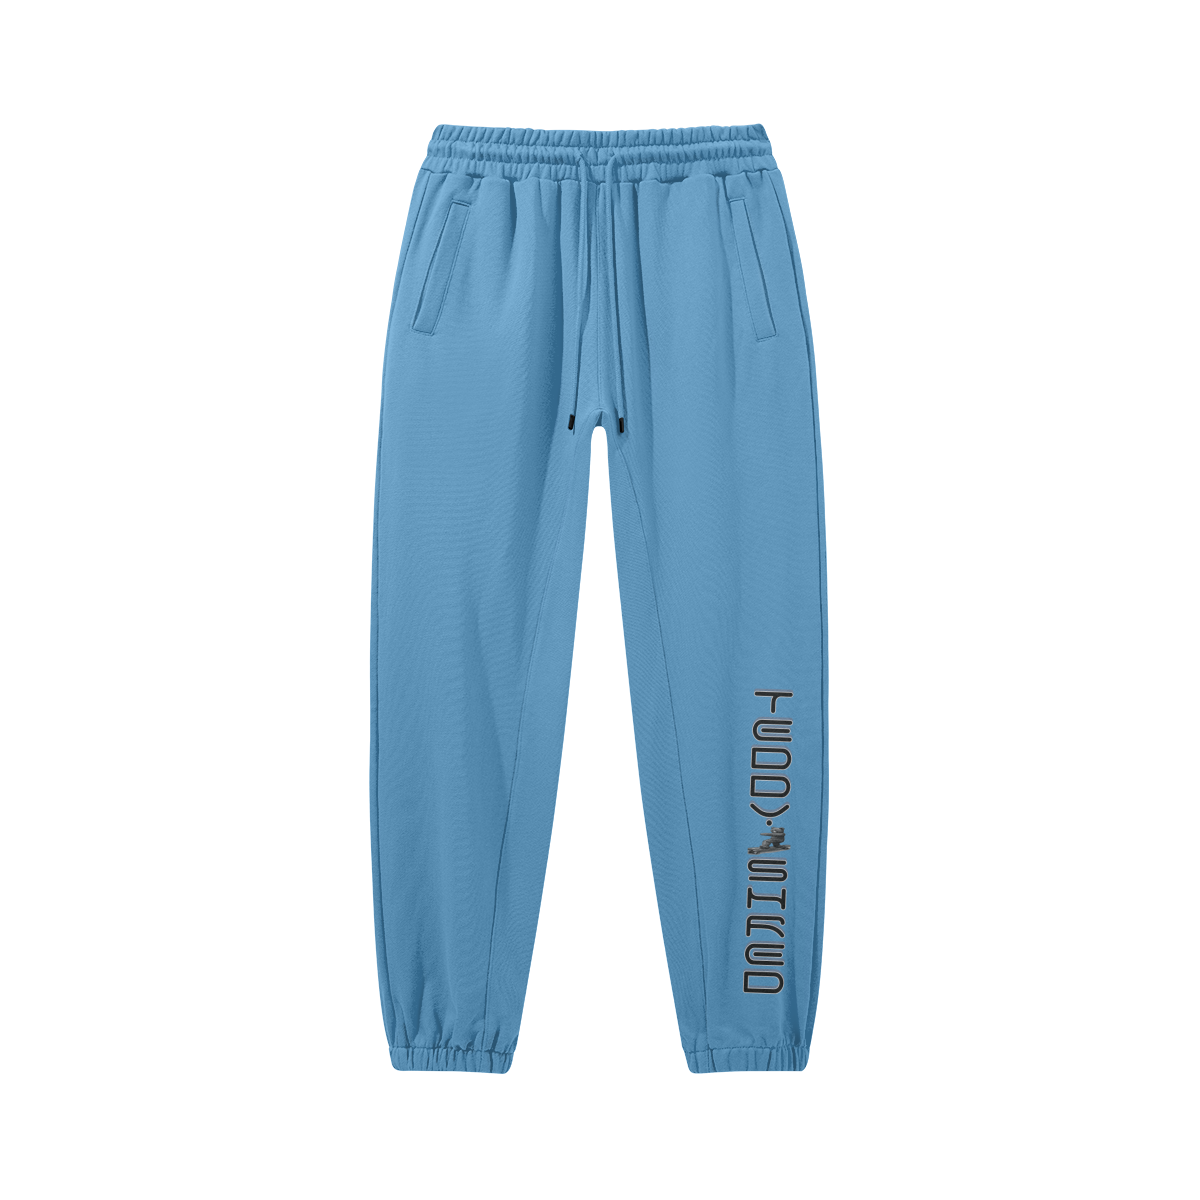 Teddy Ride Shred 380GSM Unisex Heavyweight Baggy Sweatpants - unisex sweatpants at TFC&H Co.